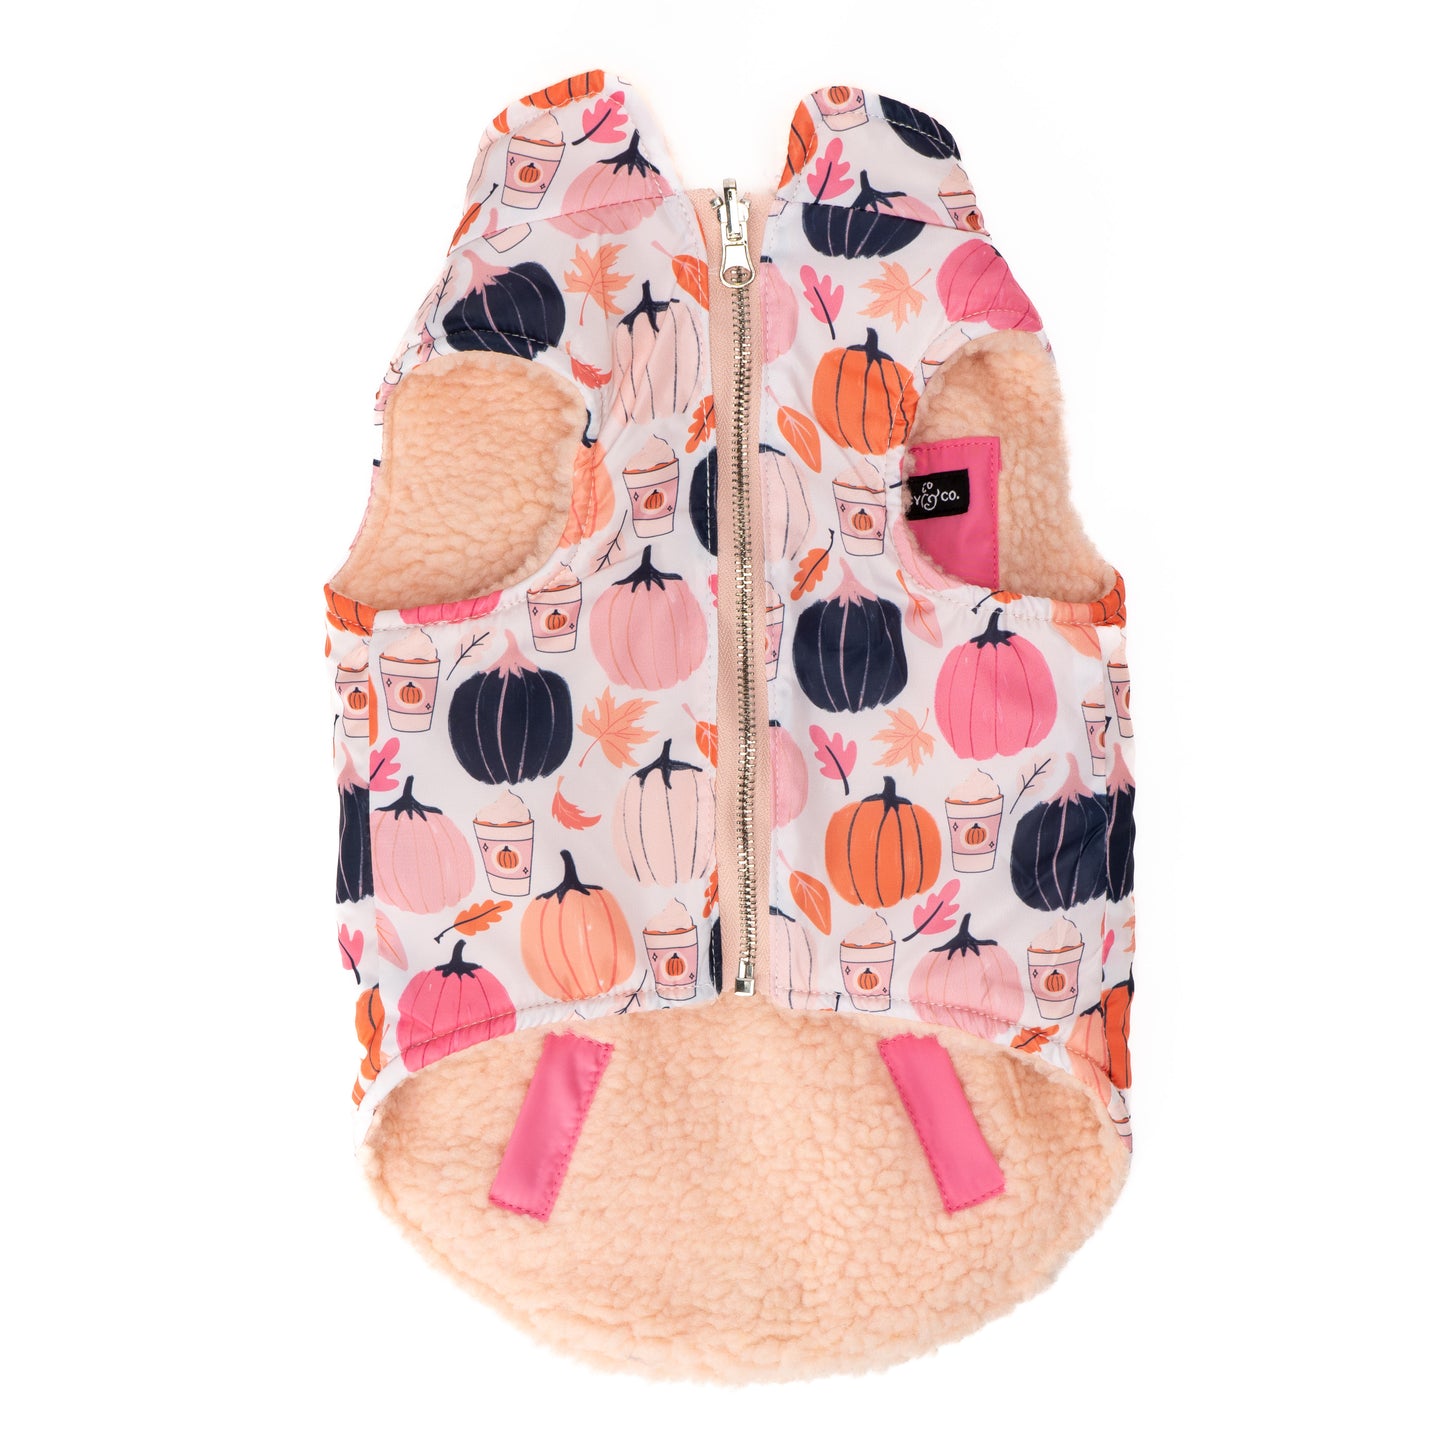 The Falling for You Reversible Teddy Vest